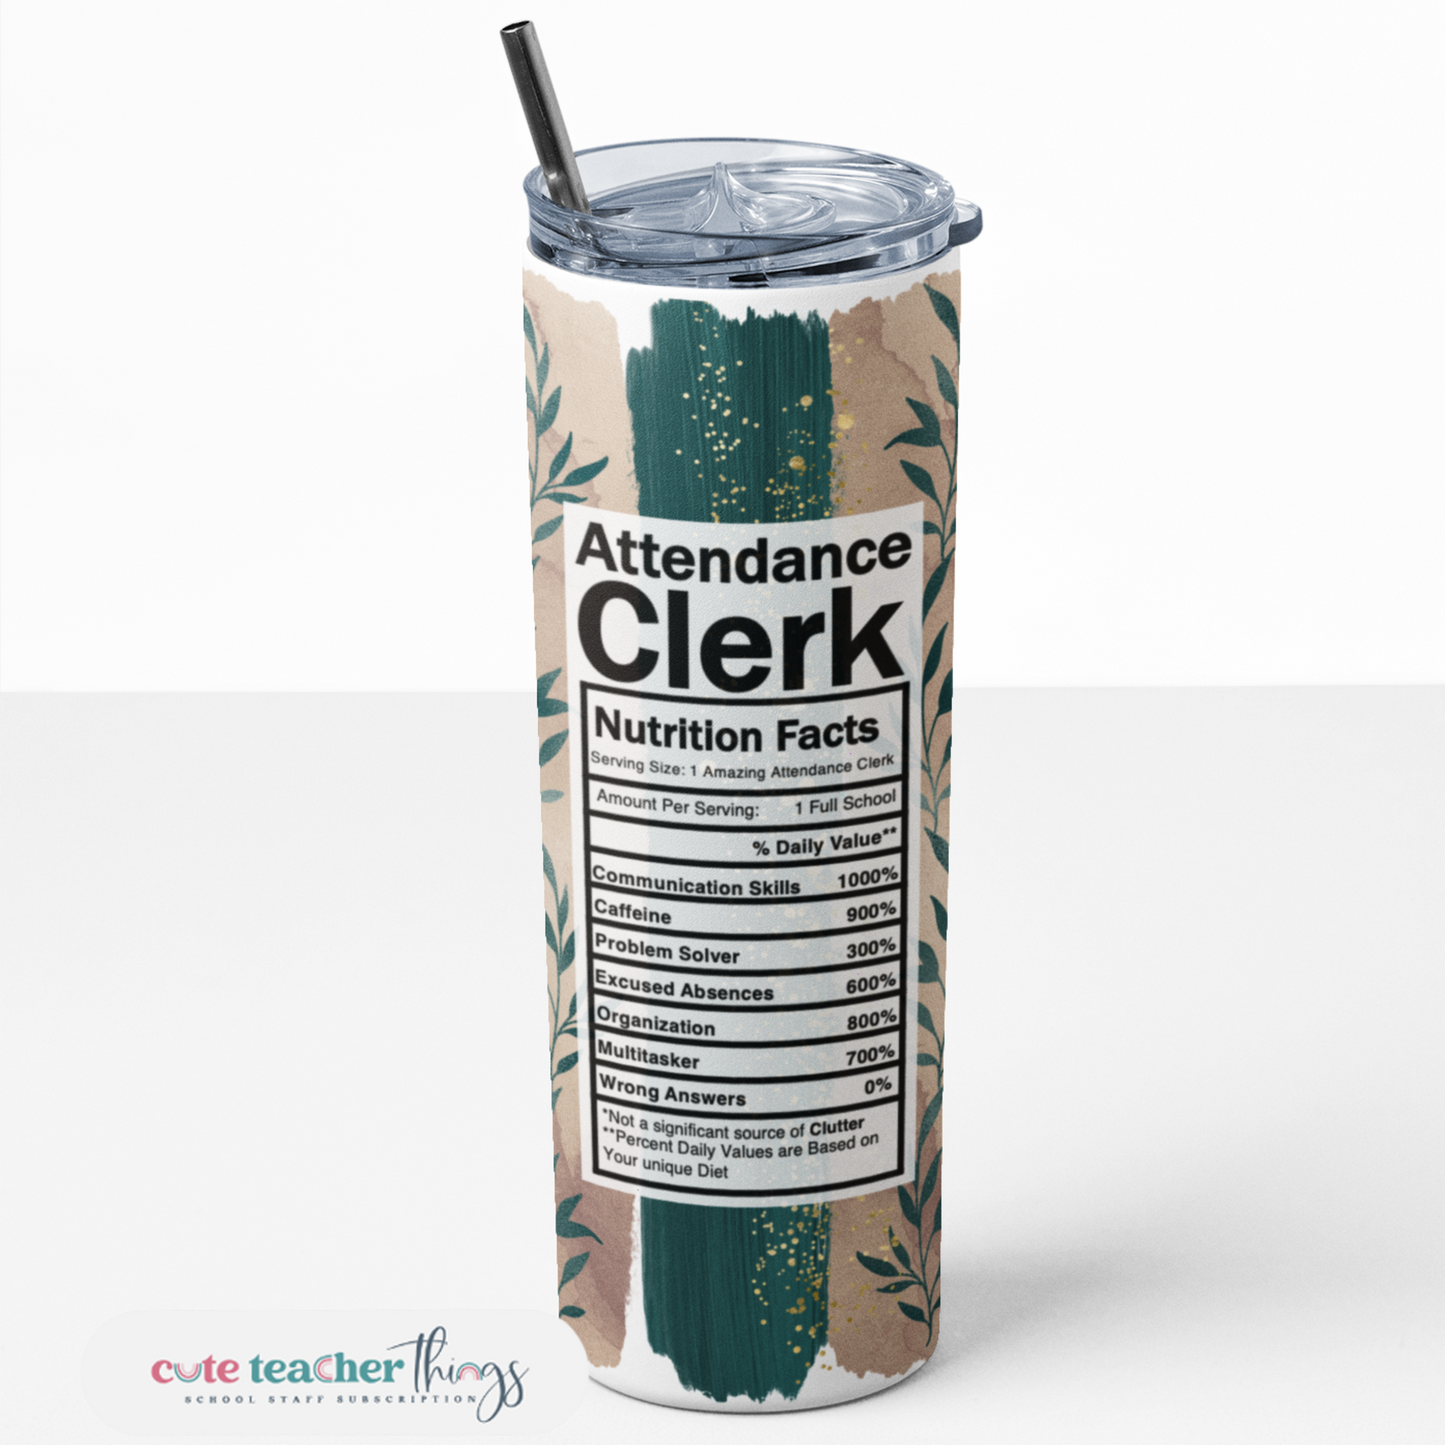 fall harvest attendance clerk nutrition facts design skinny tumbler with lid and straw.